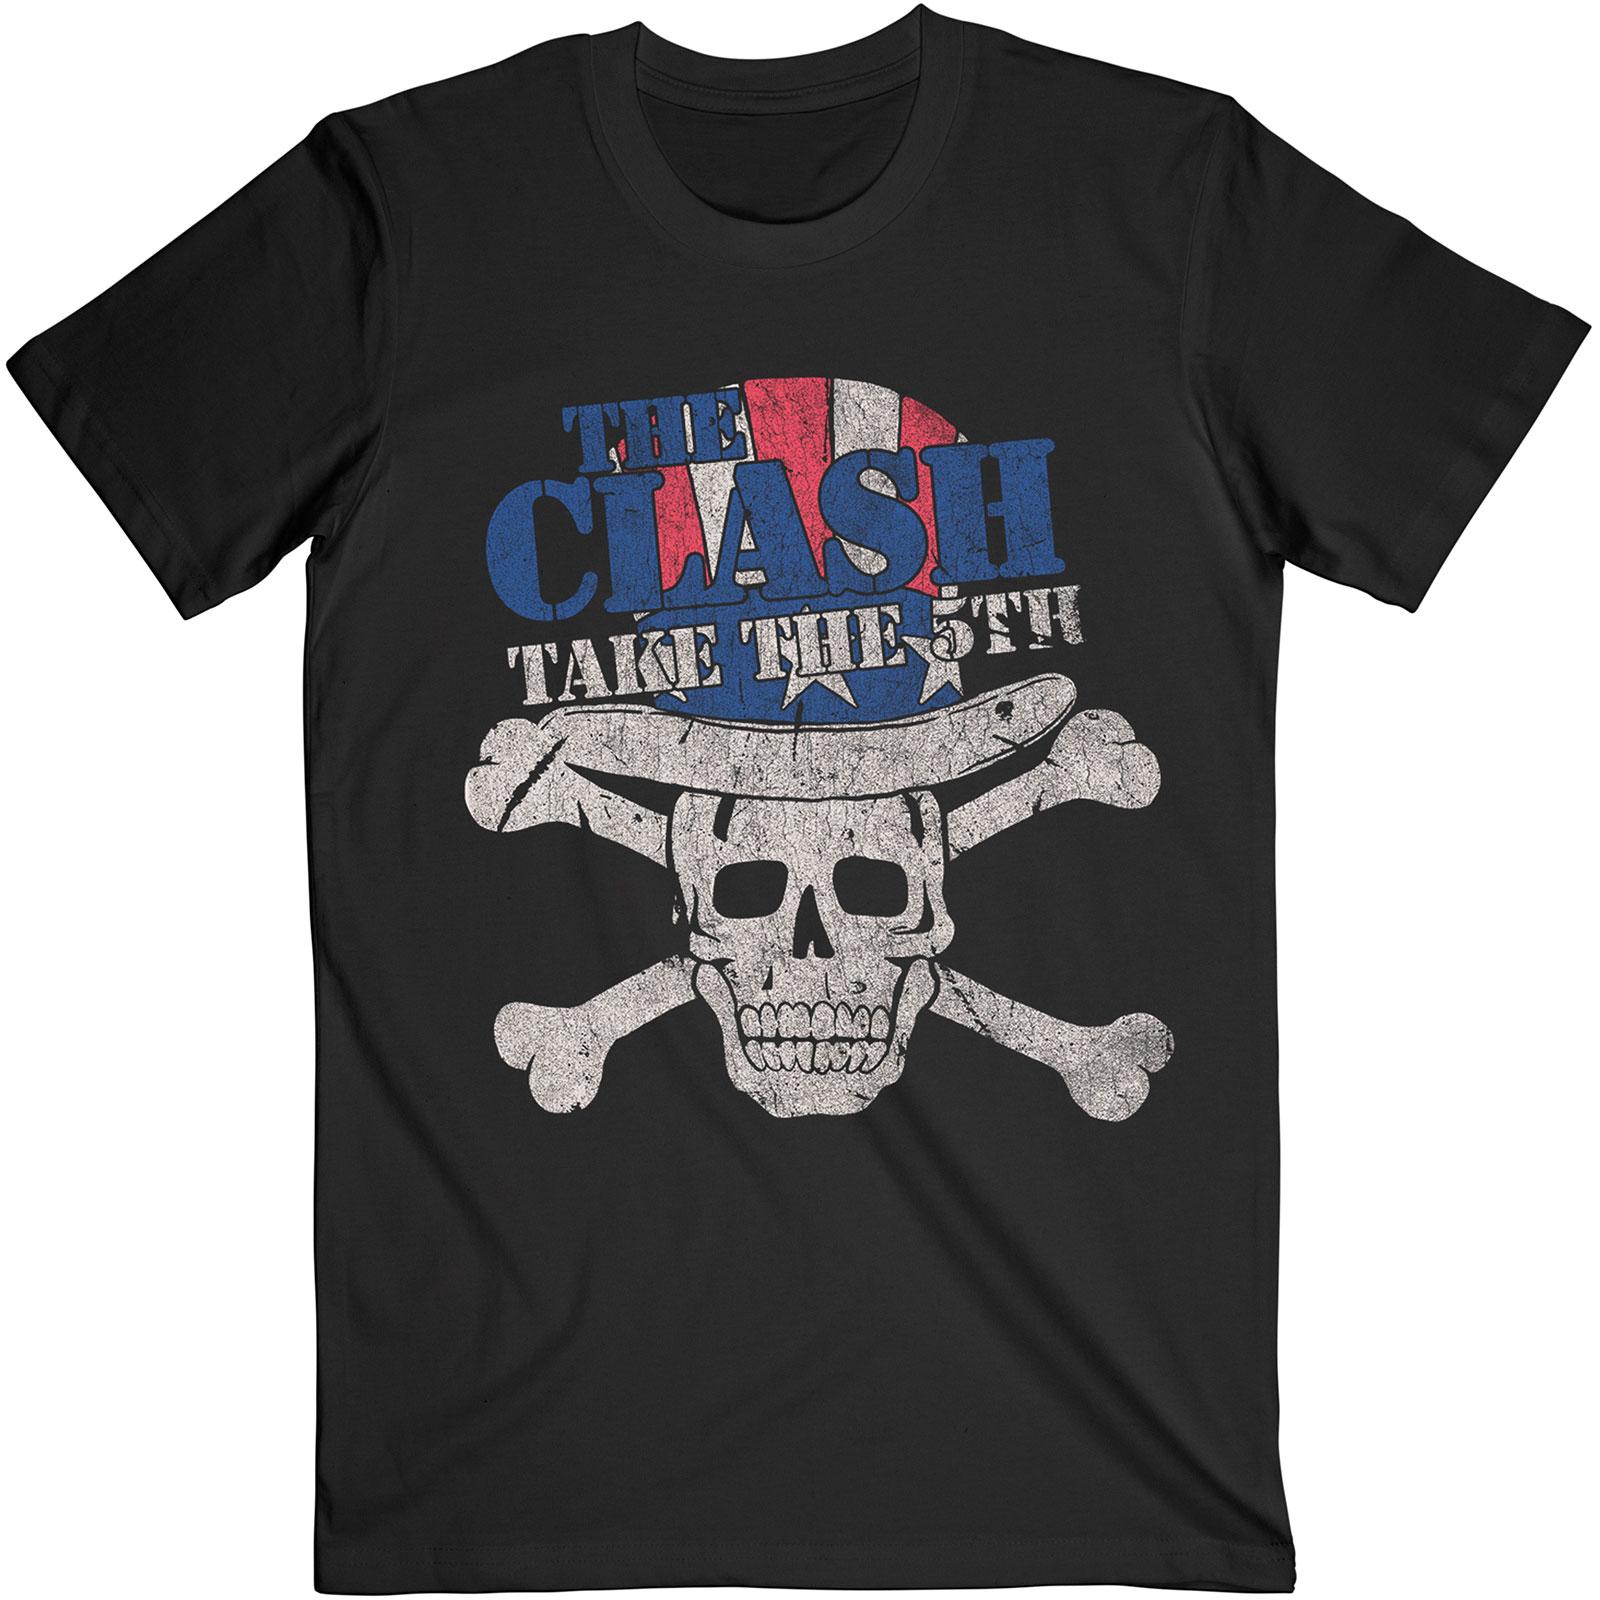 THE CLASH - Unisex T-Shirt: Take the 5th